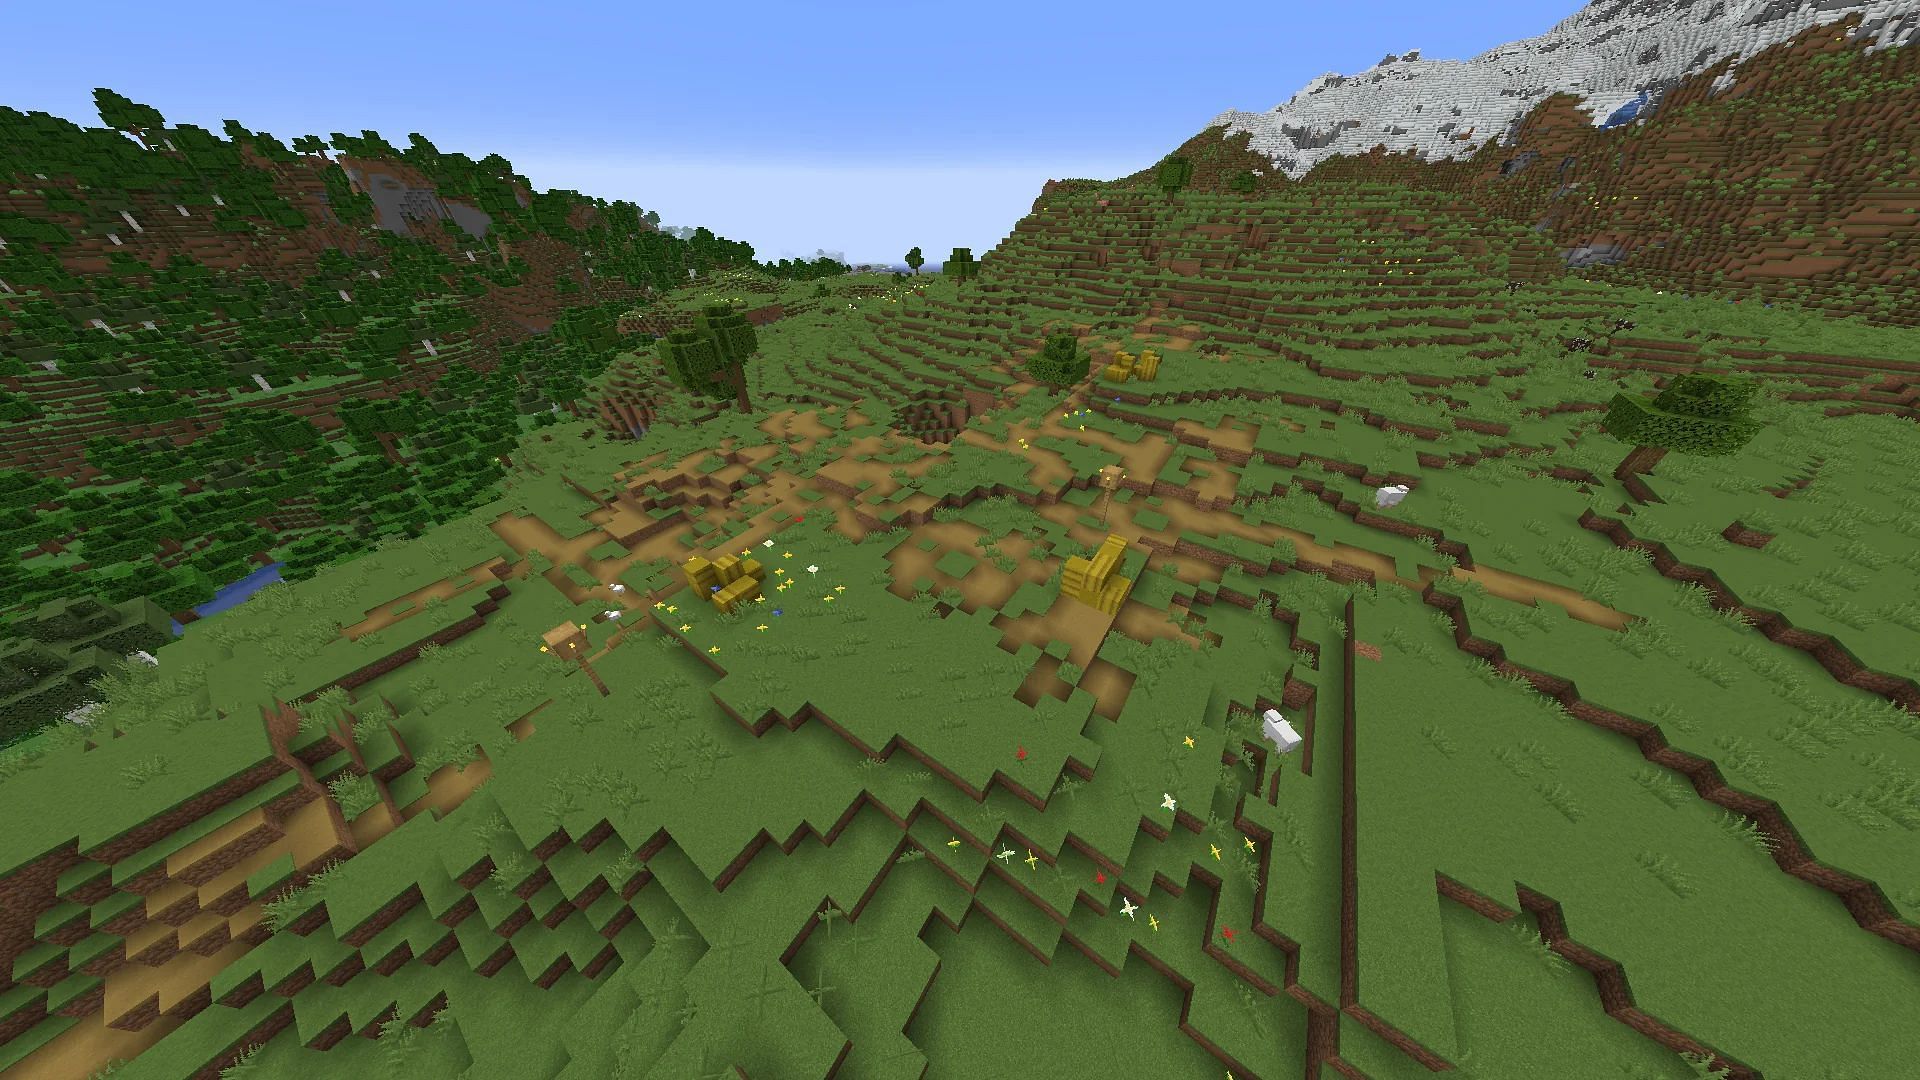 Minecraft Redditor shared a seed that has a village with no huts or structures (Image via Reddit/u/Avoumen)